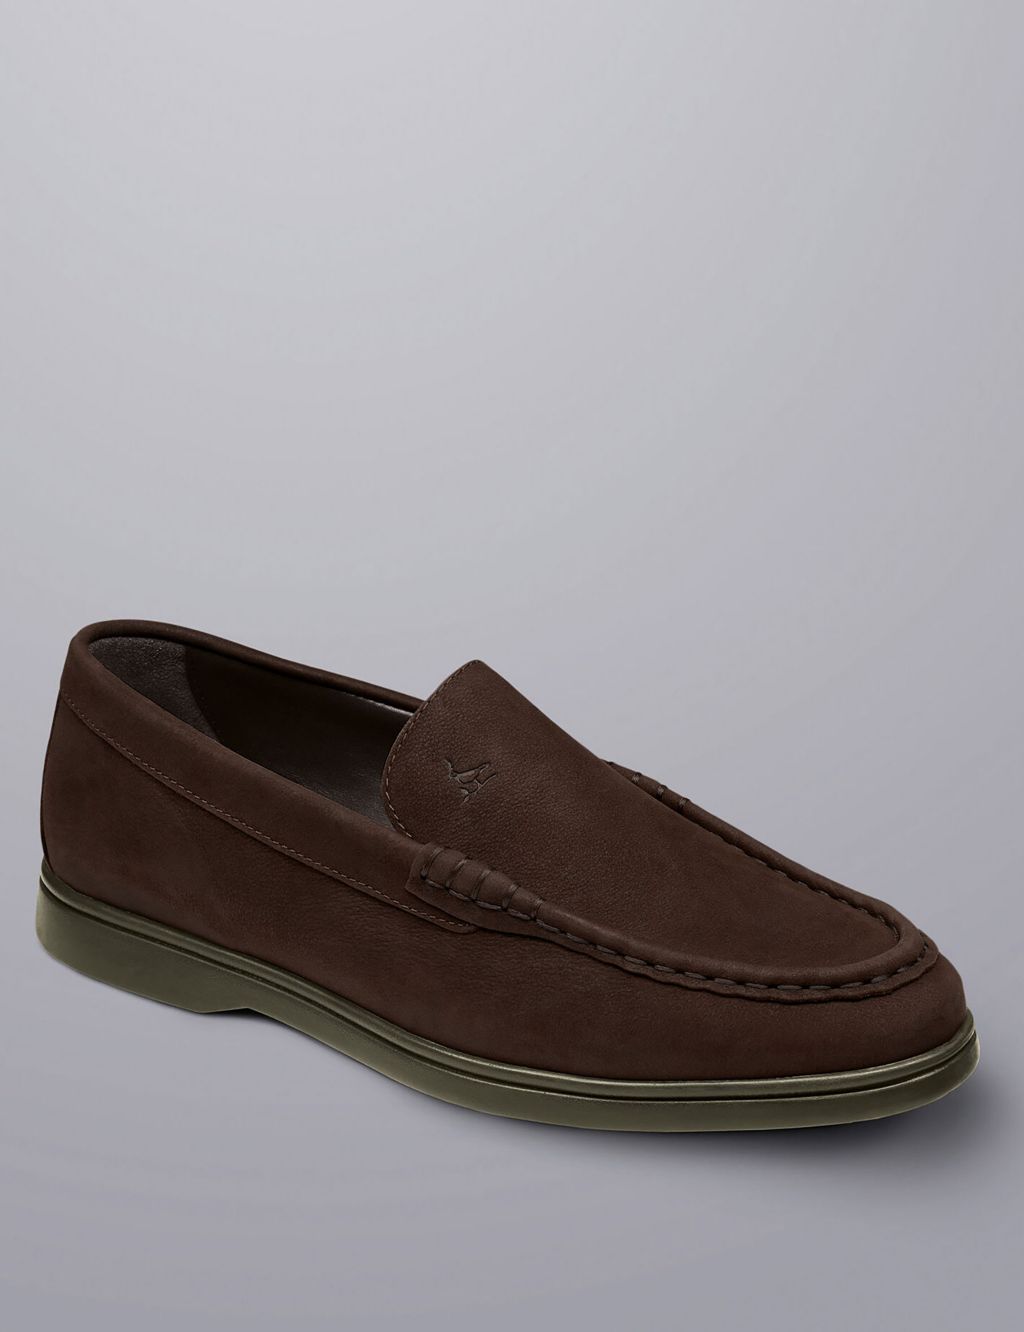 Suede Slip On Shoes image 3